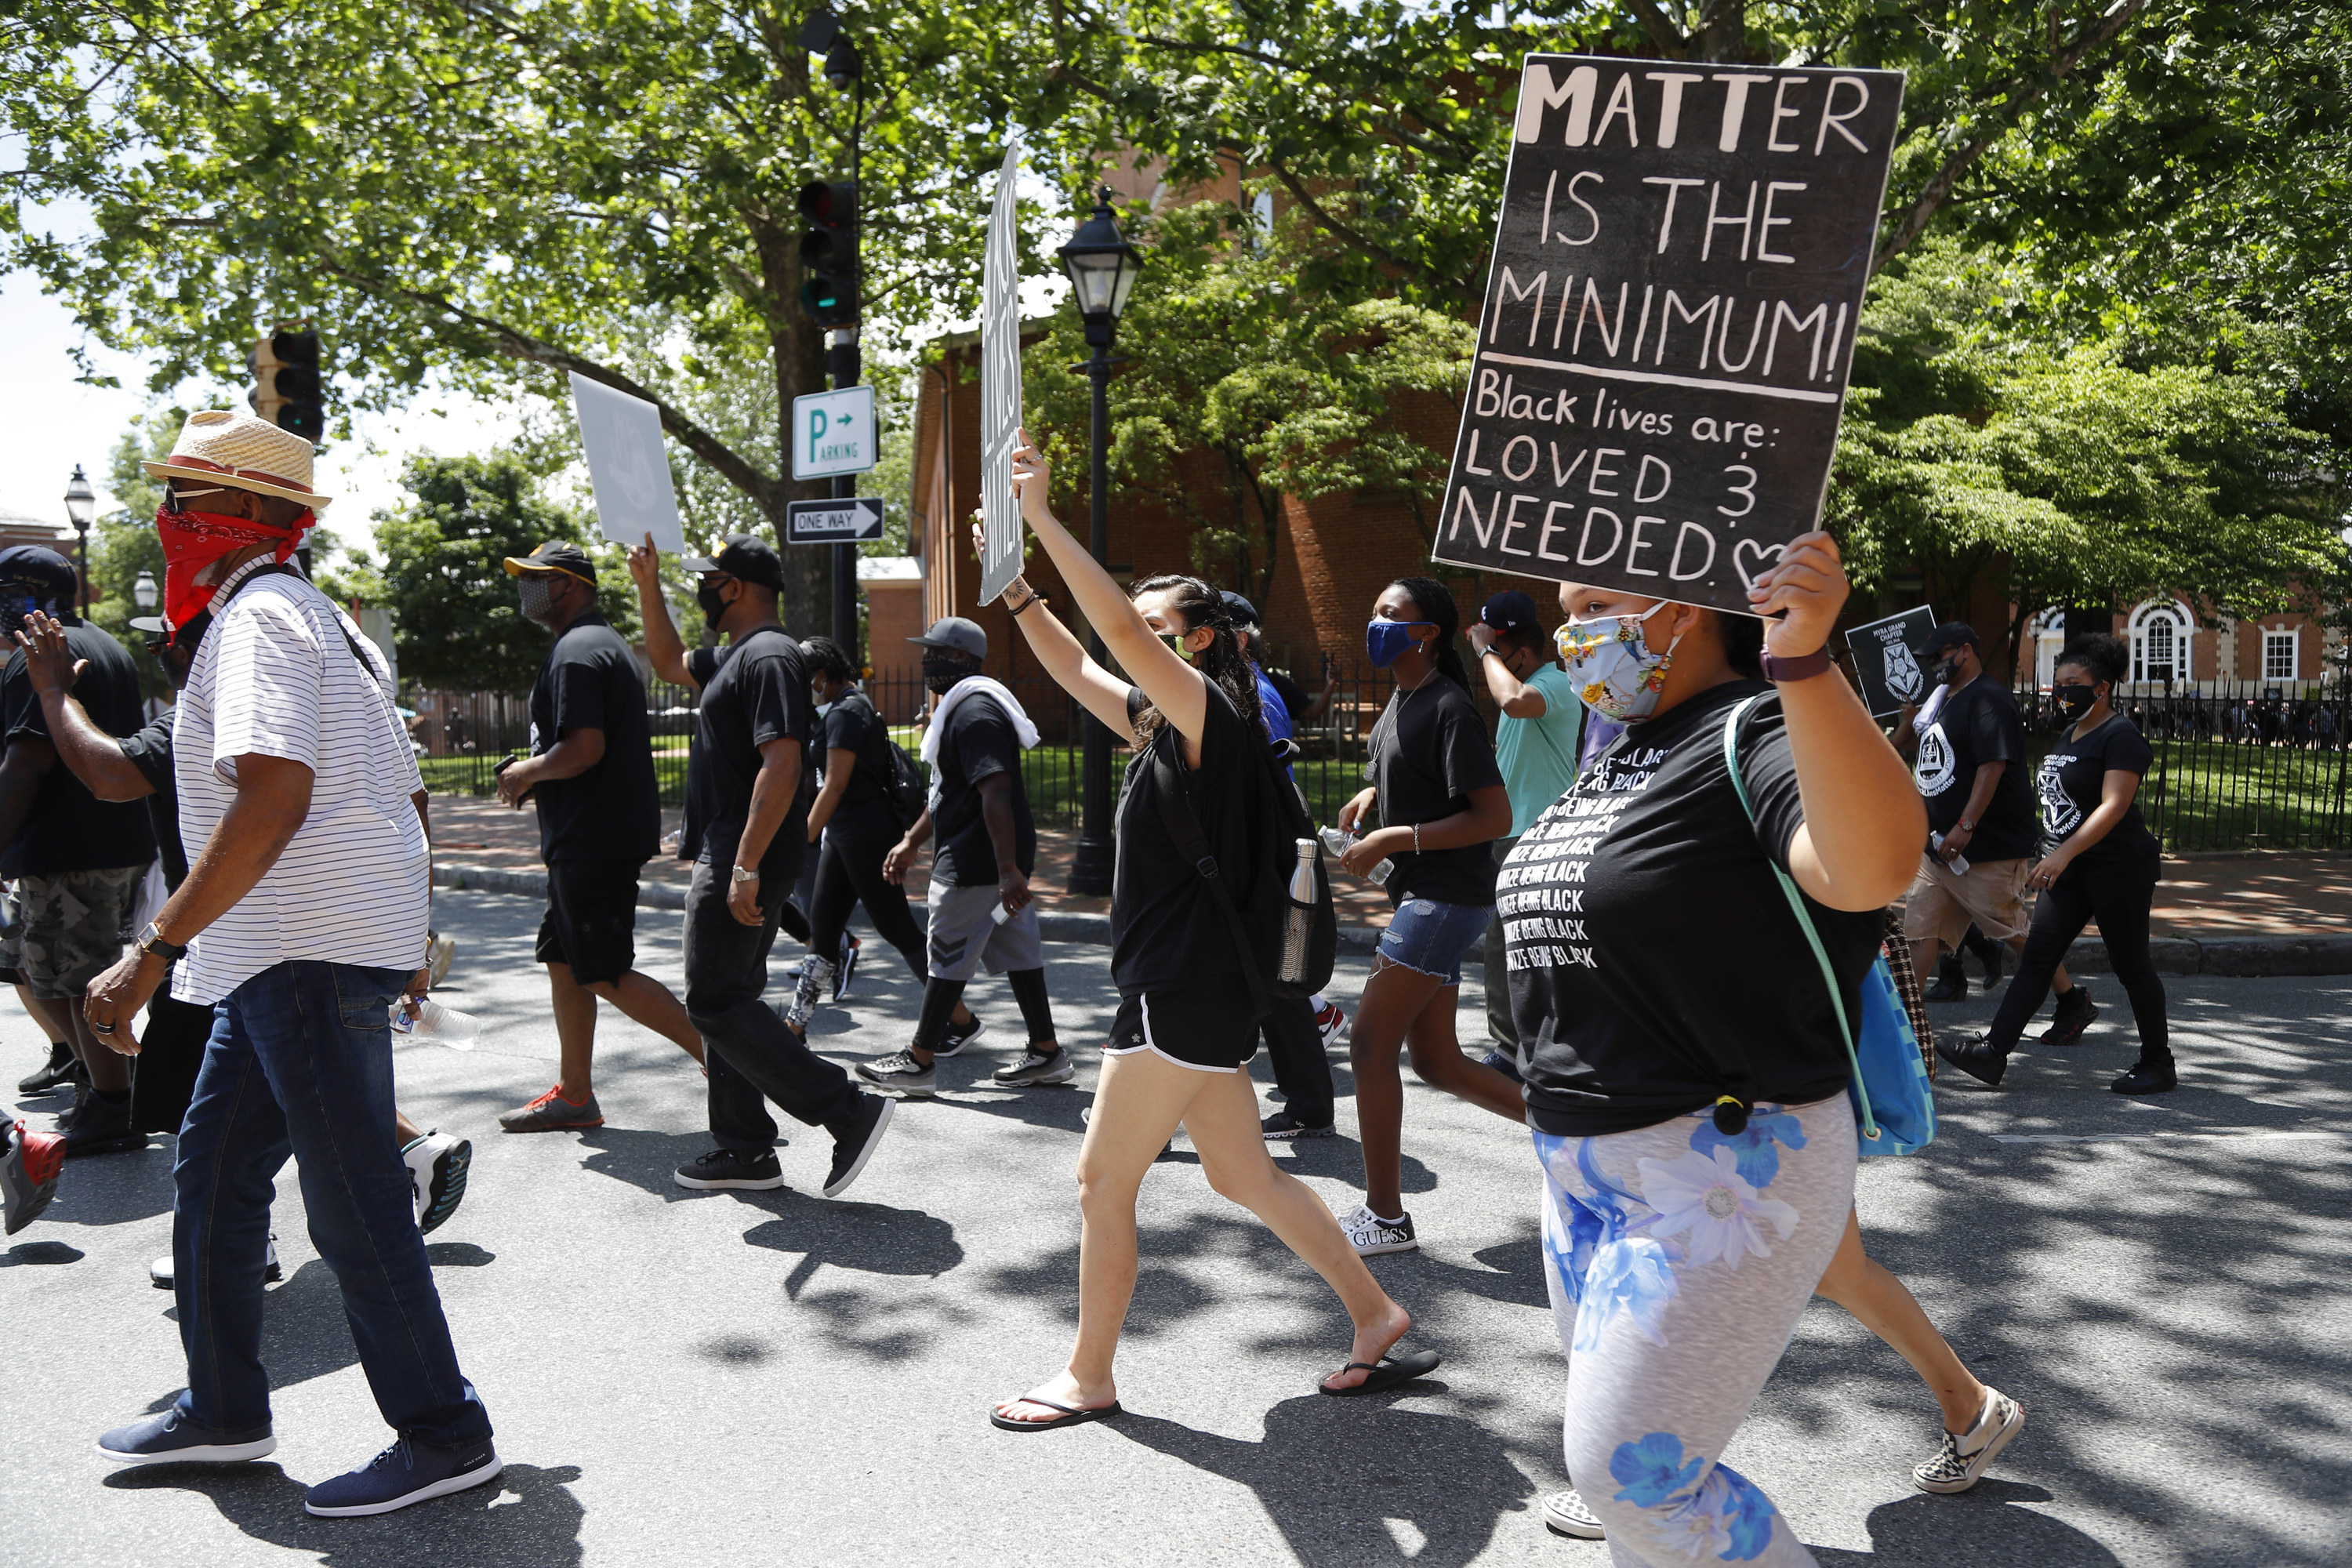 People hold signs while marching. One person&#x27;s sign reads, &quot;Matter is the minimum! Black Lives are loved and needed&quot;